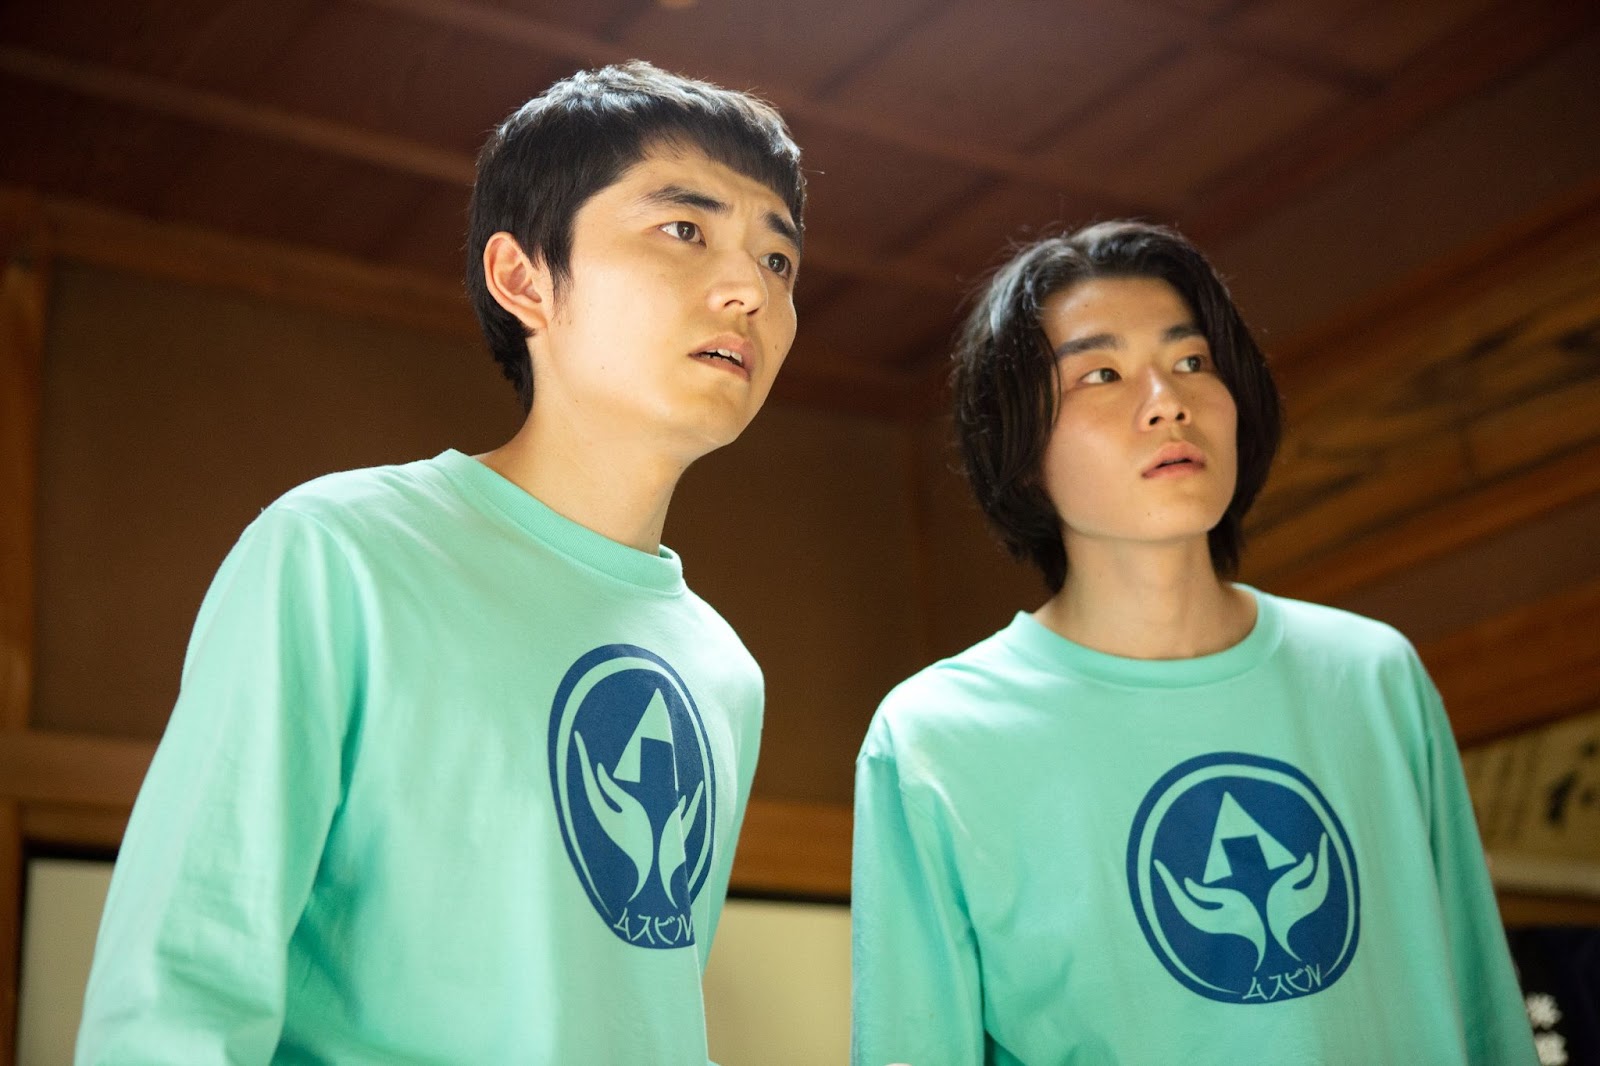 A screen still from Special Actors, depicting Kazuto and another young man wearing Special Actors shirts and looking in shock at something.